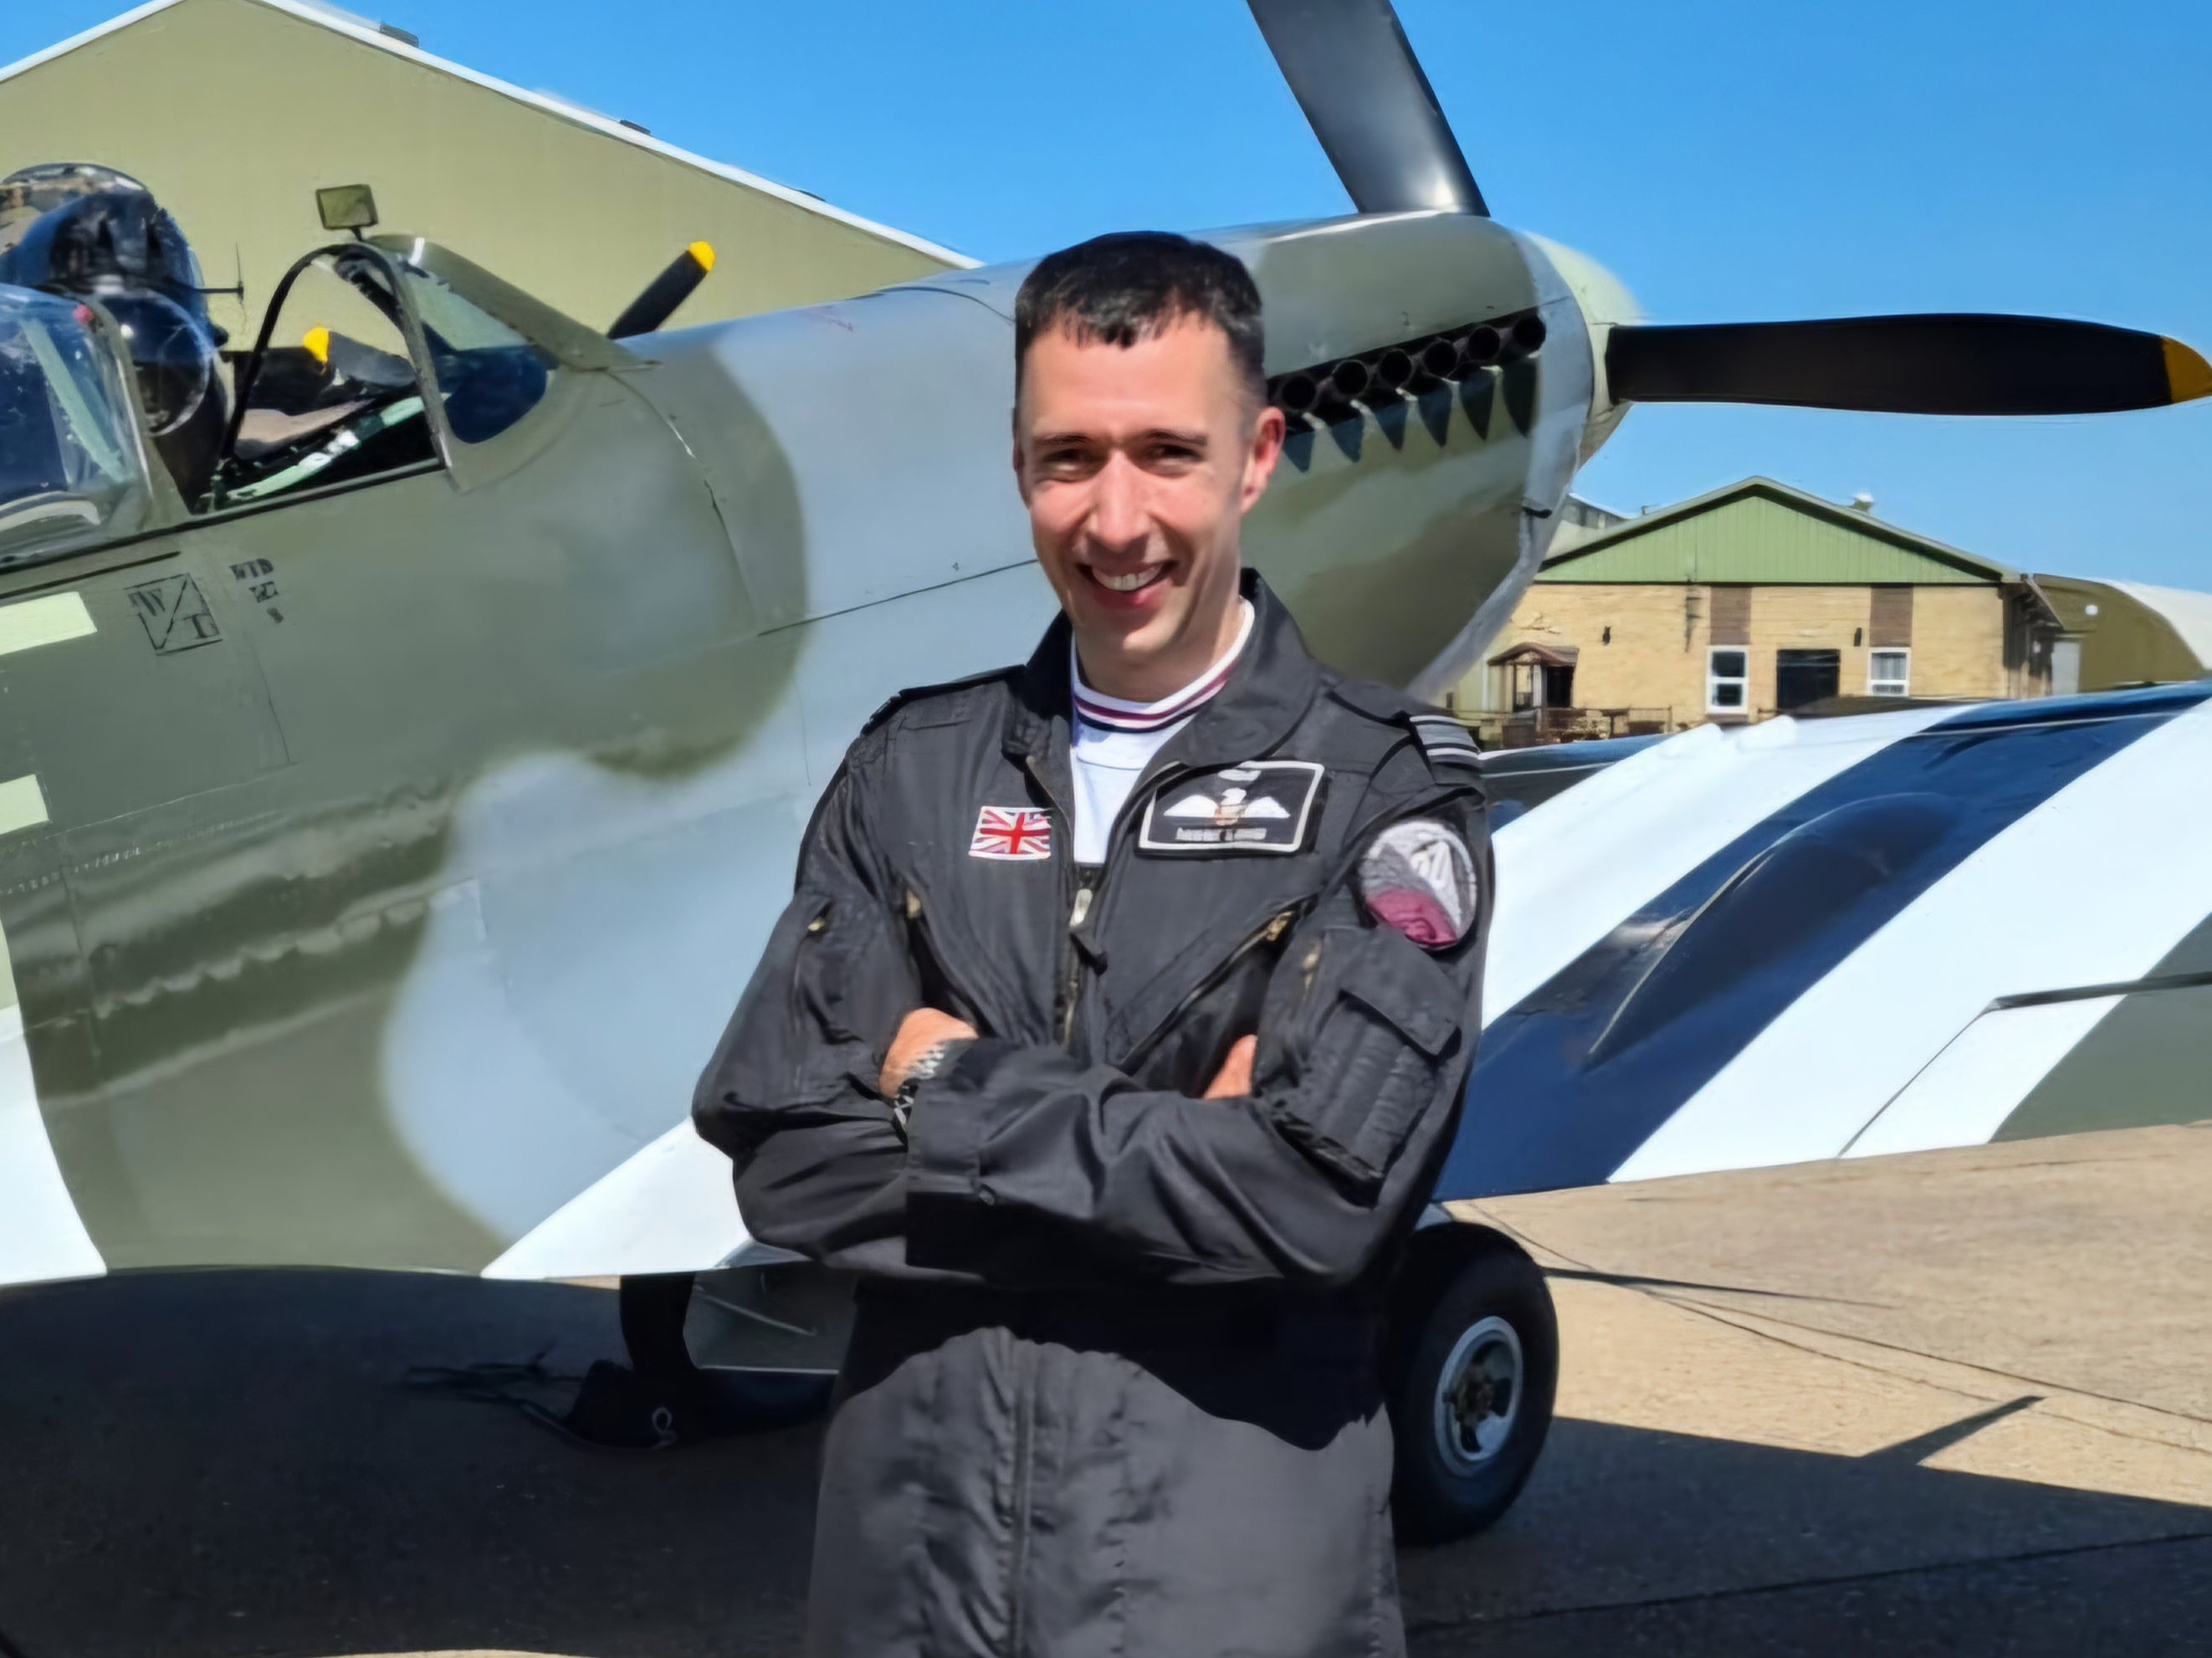 Squadron leader Mark Long was killed in a Spitfire crash near RAF Coningsby in Lincolnshire during a Battle of Britain commemoration event on Saturday